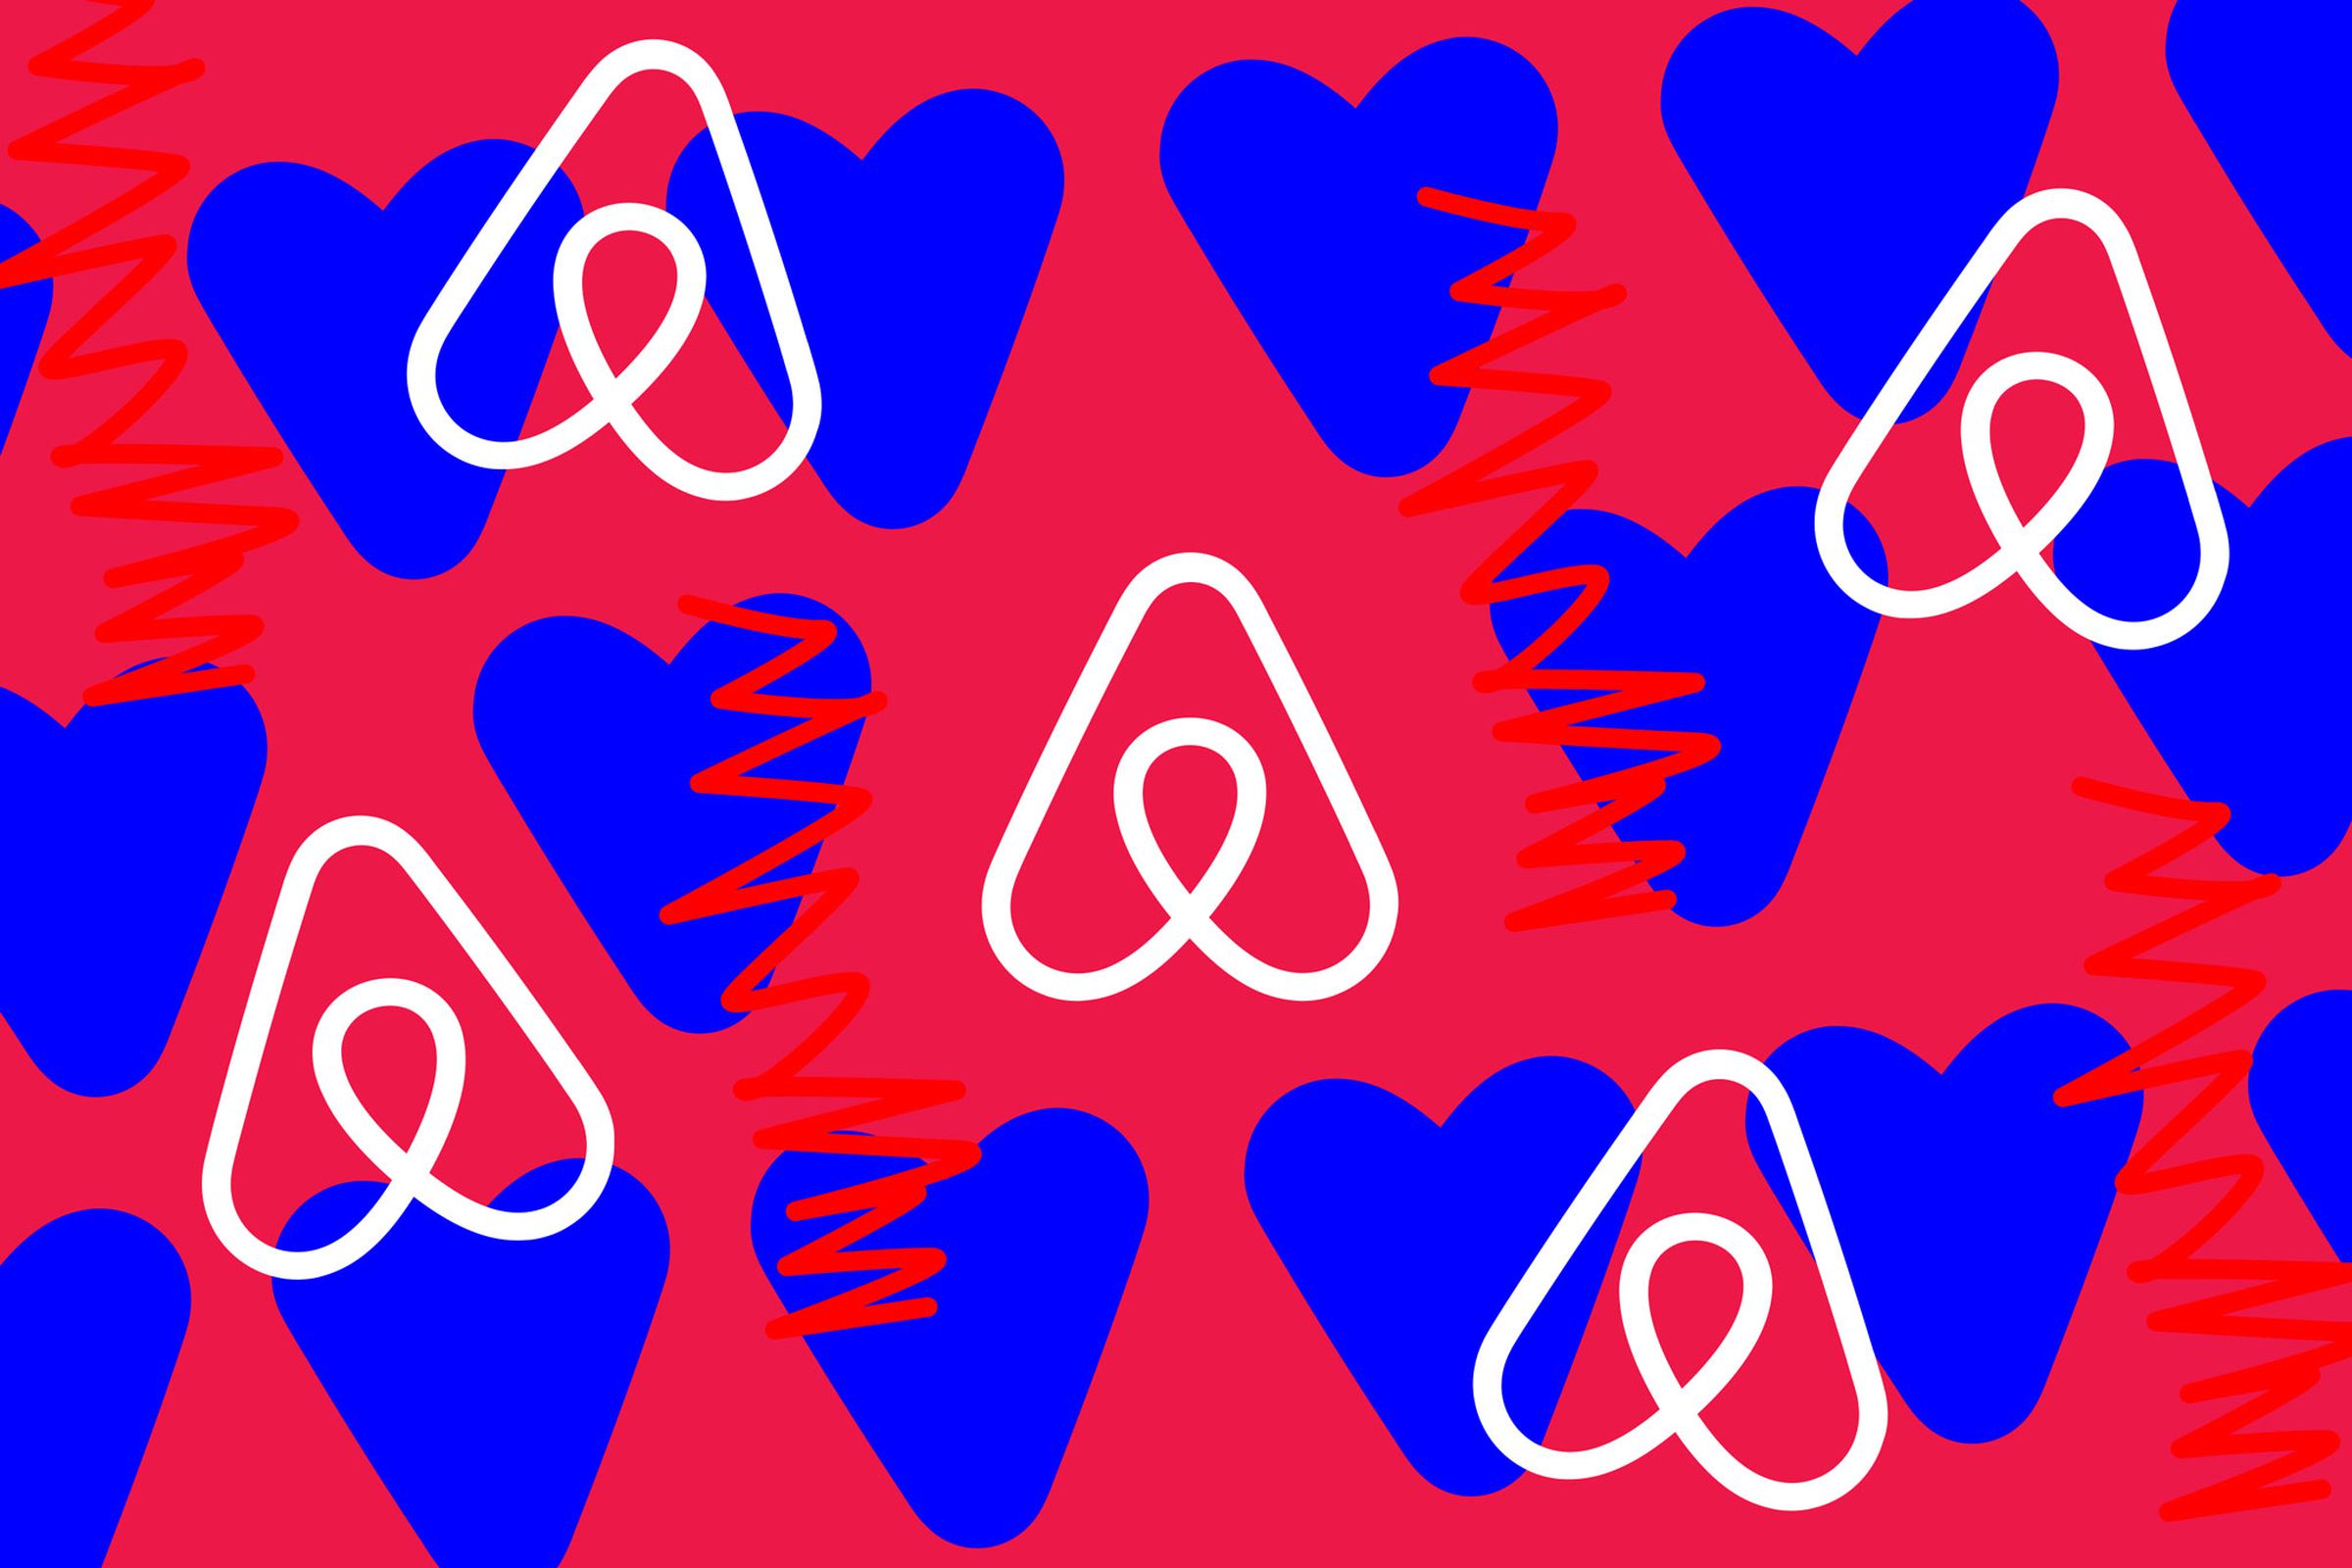 An image showing the Airbnb logo in a repeating pattern on a red and blue background